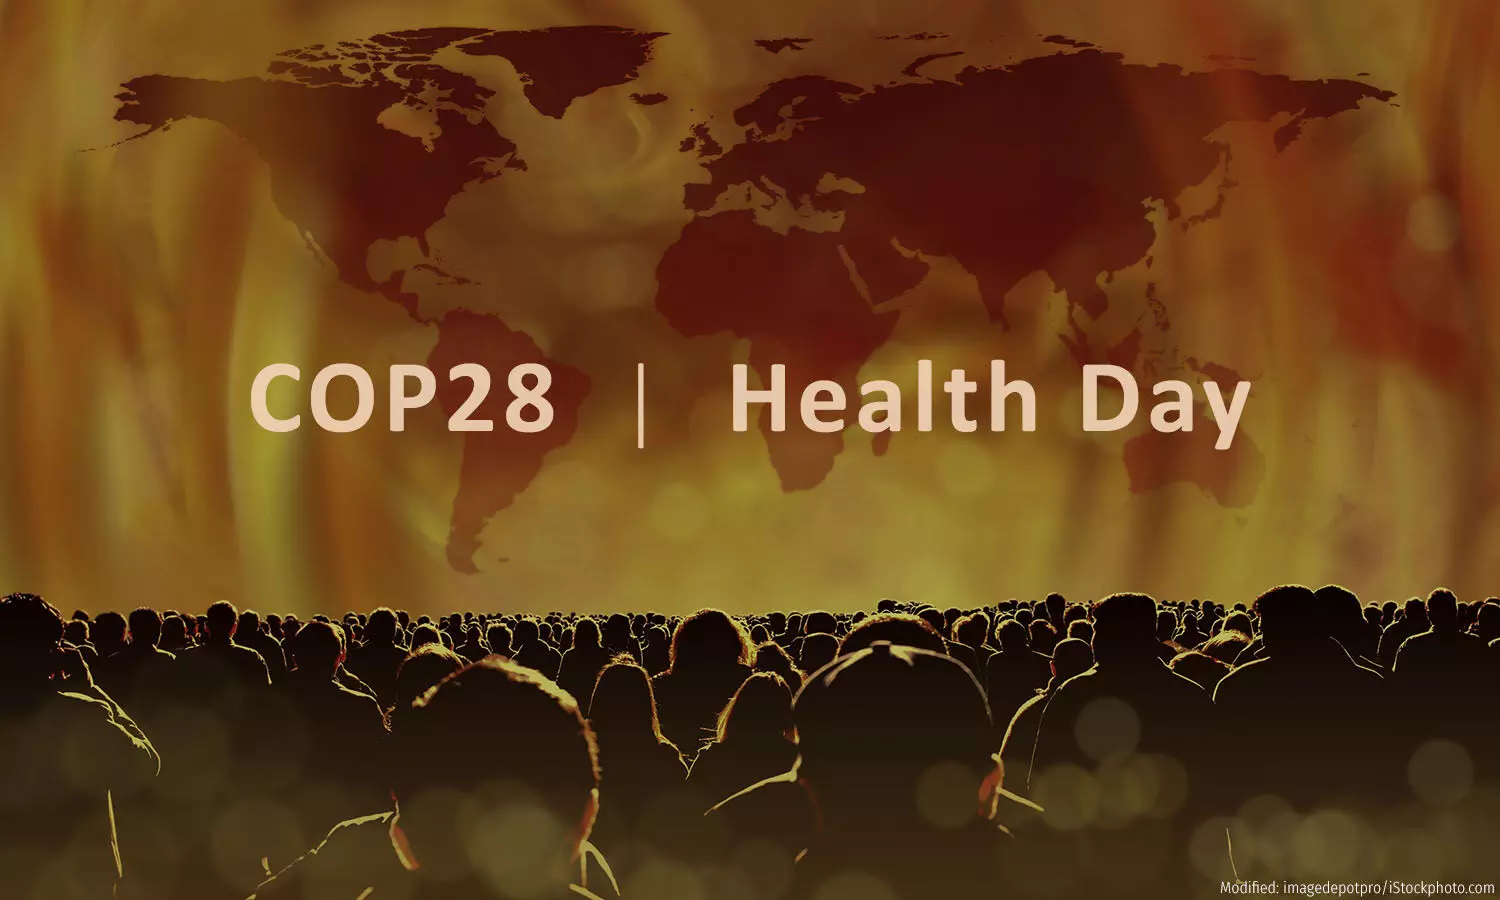 Explainer: Why First-Ever ‘Health Day’ At COP28 Is Significant